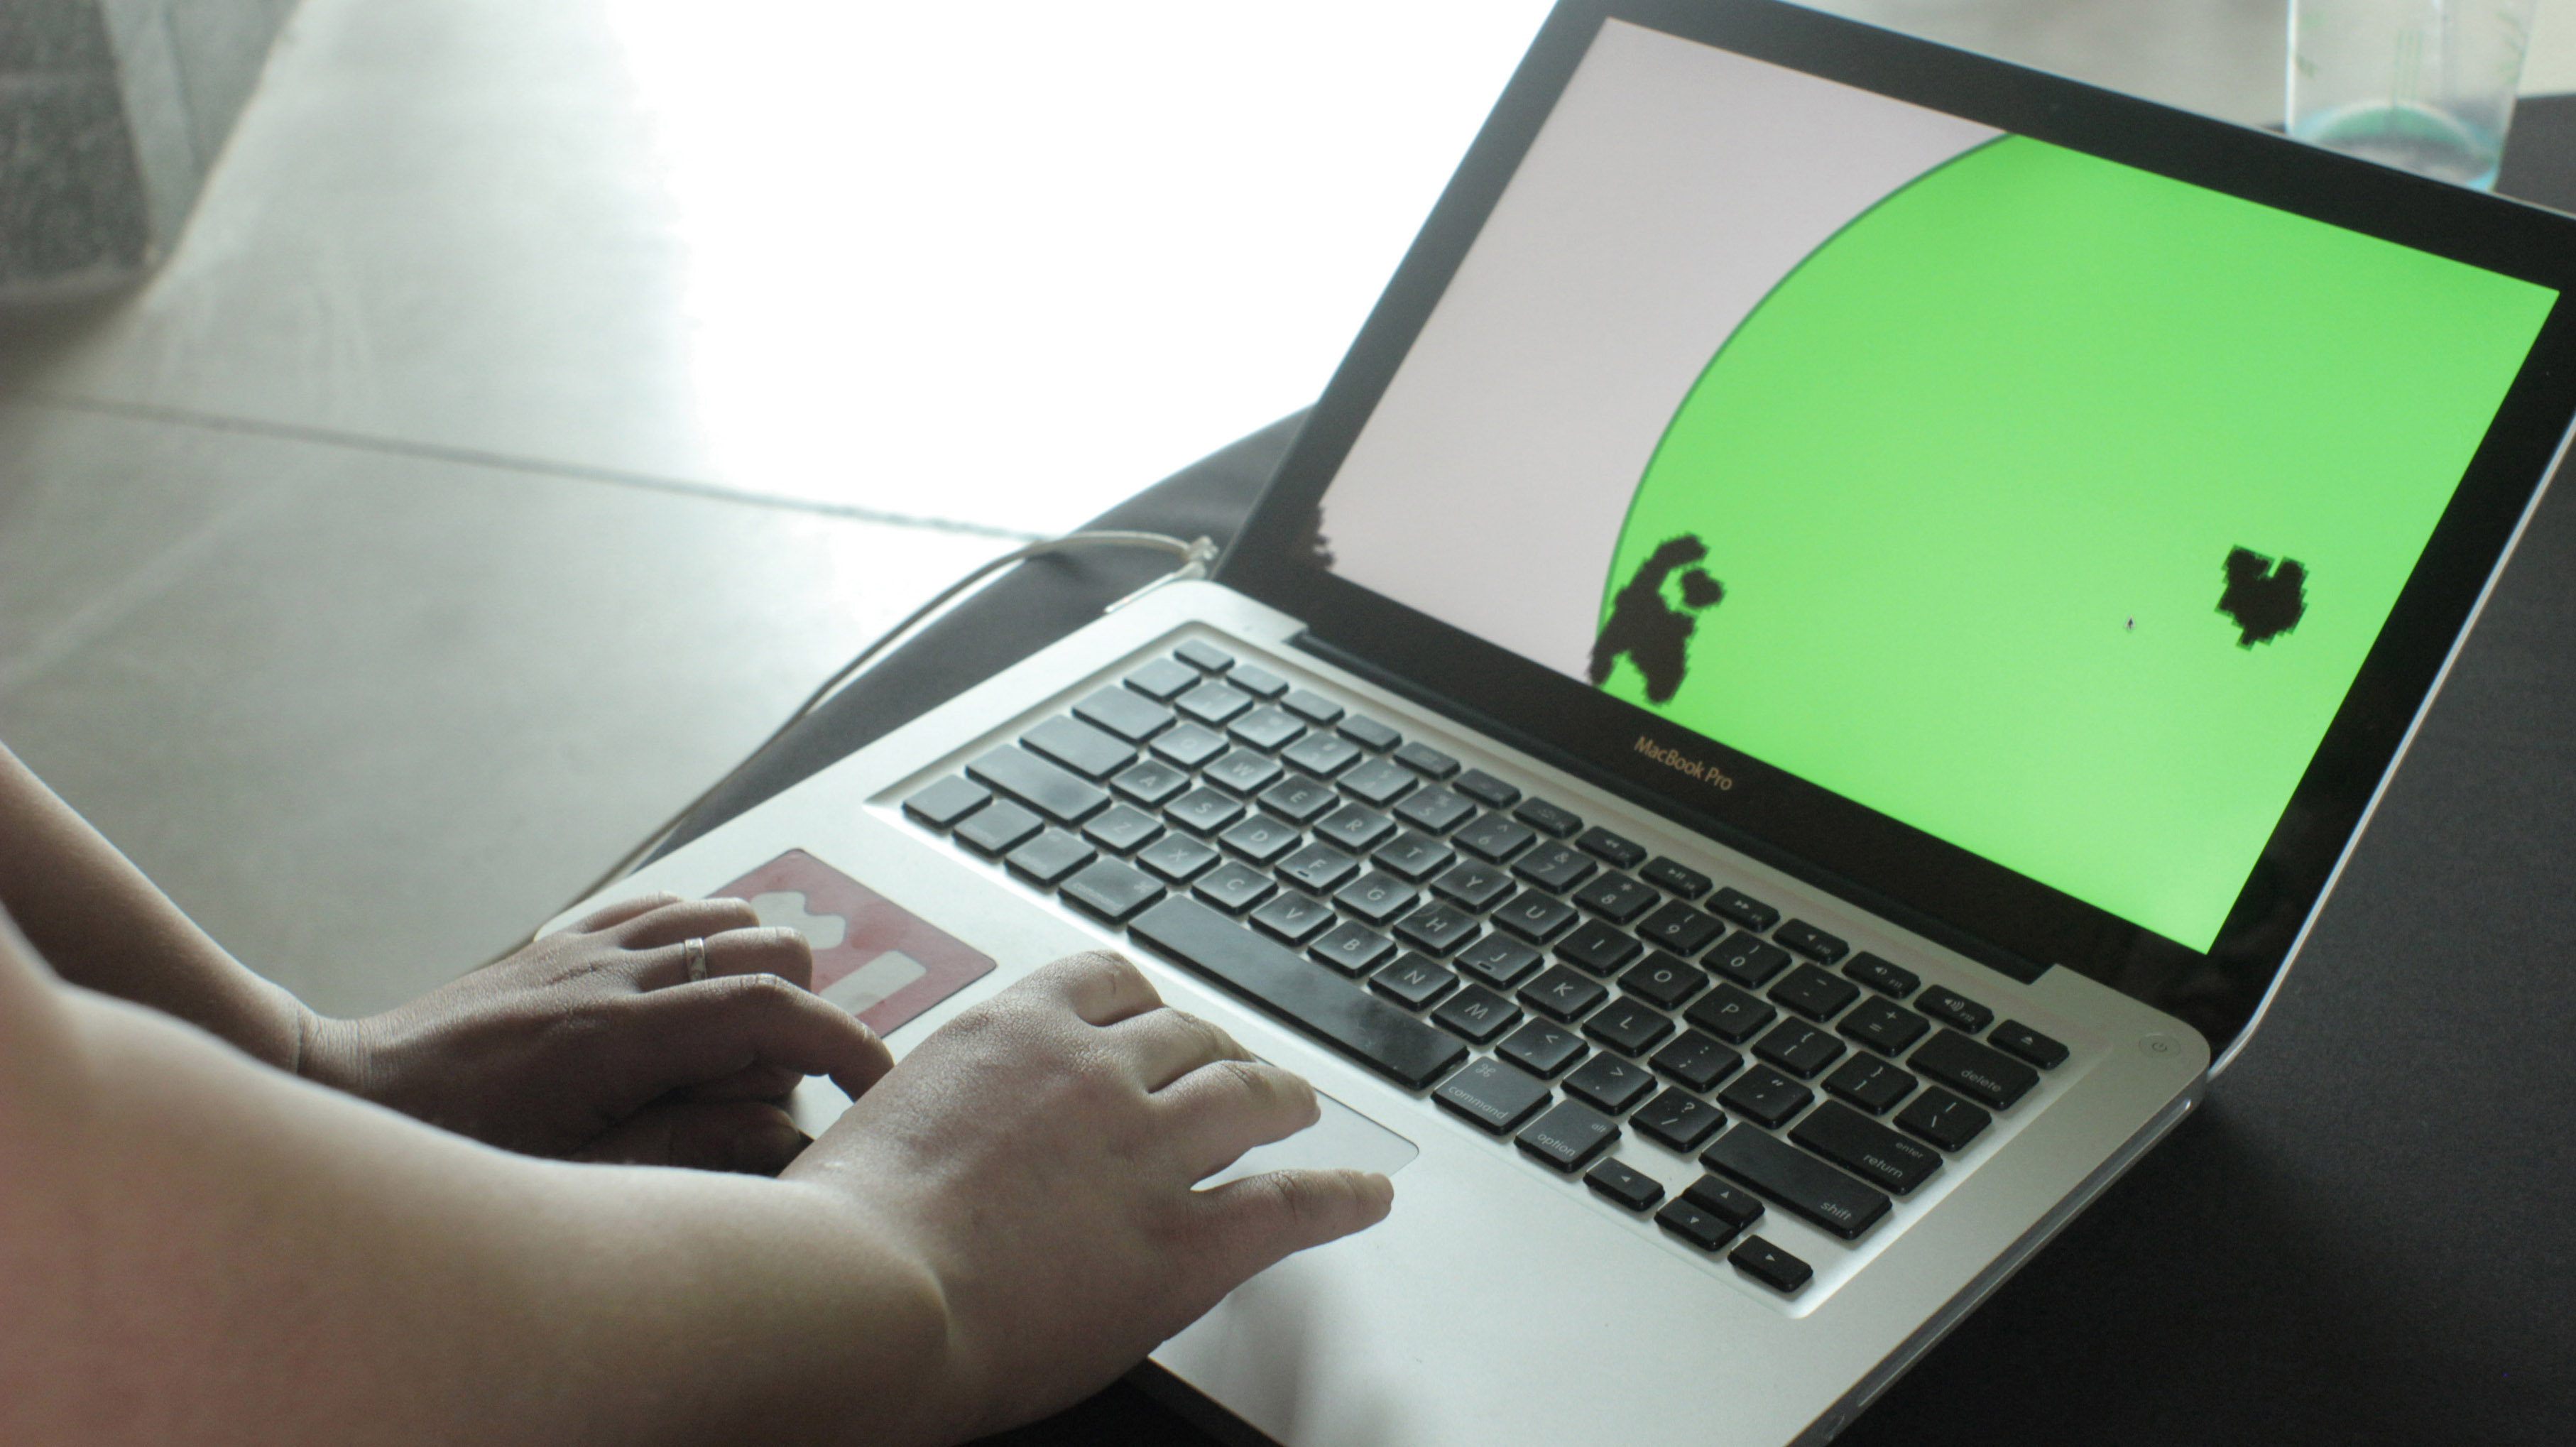 View full size version of a laptop with a green circle on the screen